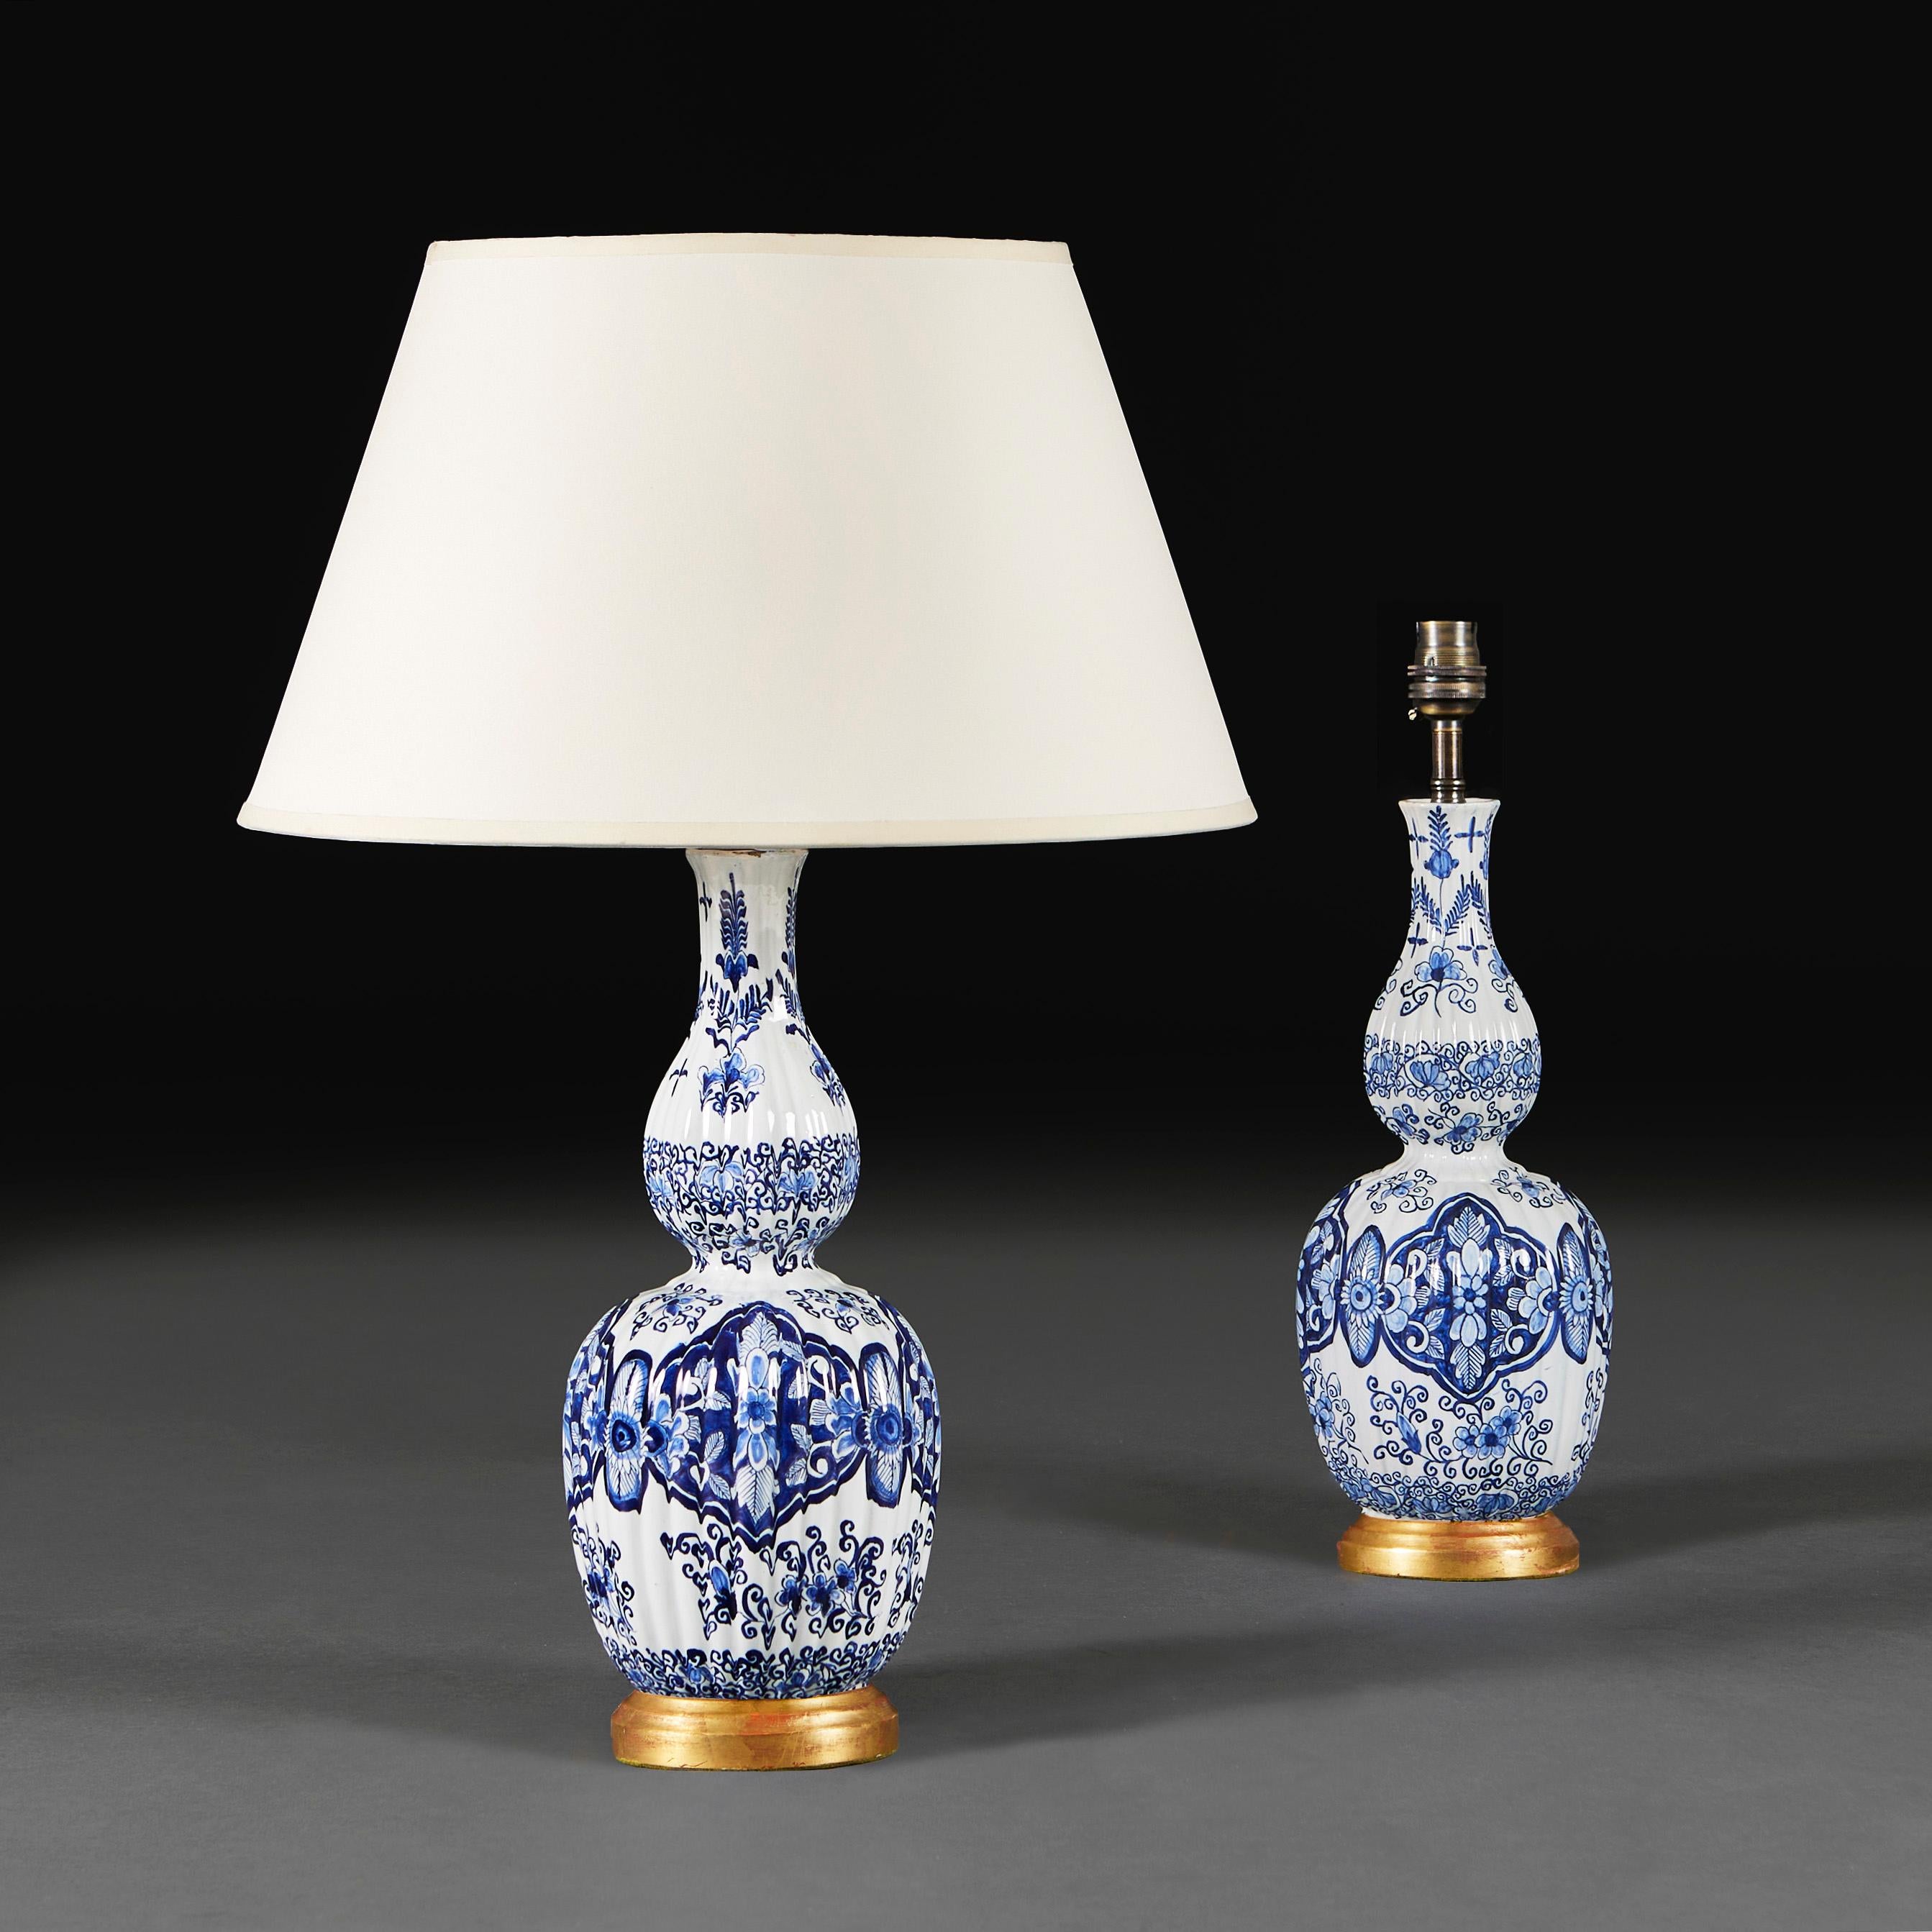 Dutch A Pair Of 19th Century Blue And White Delft Lamps